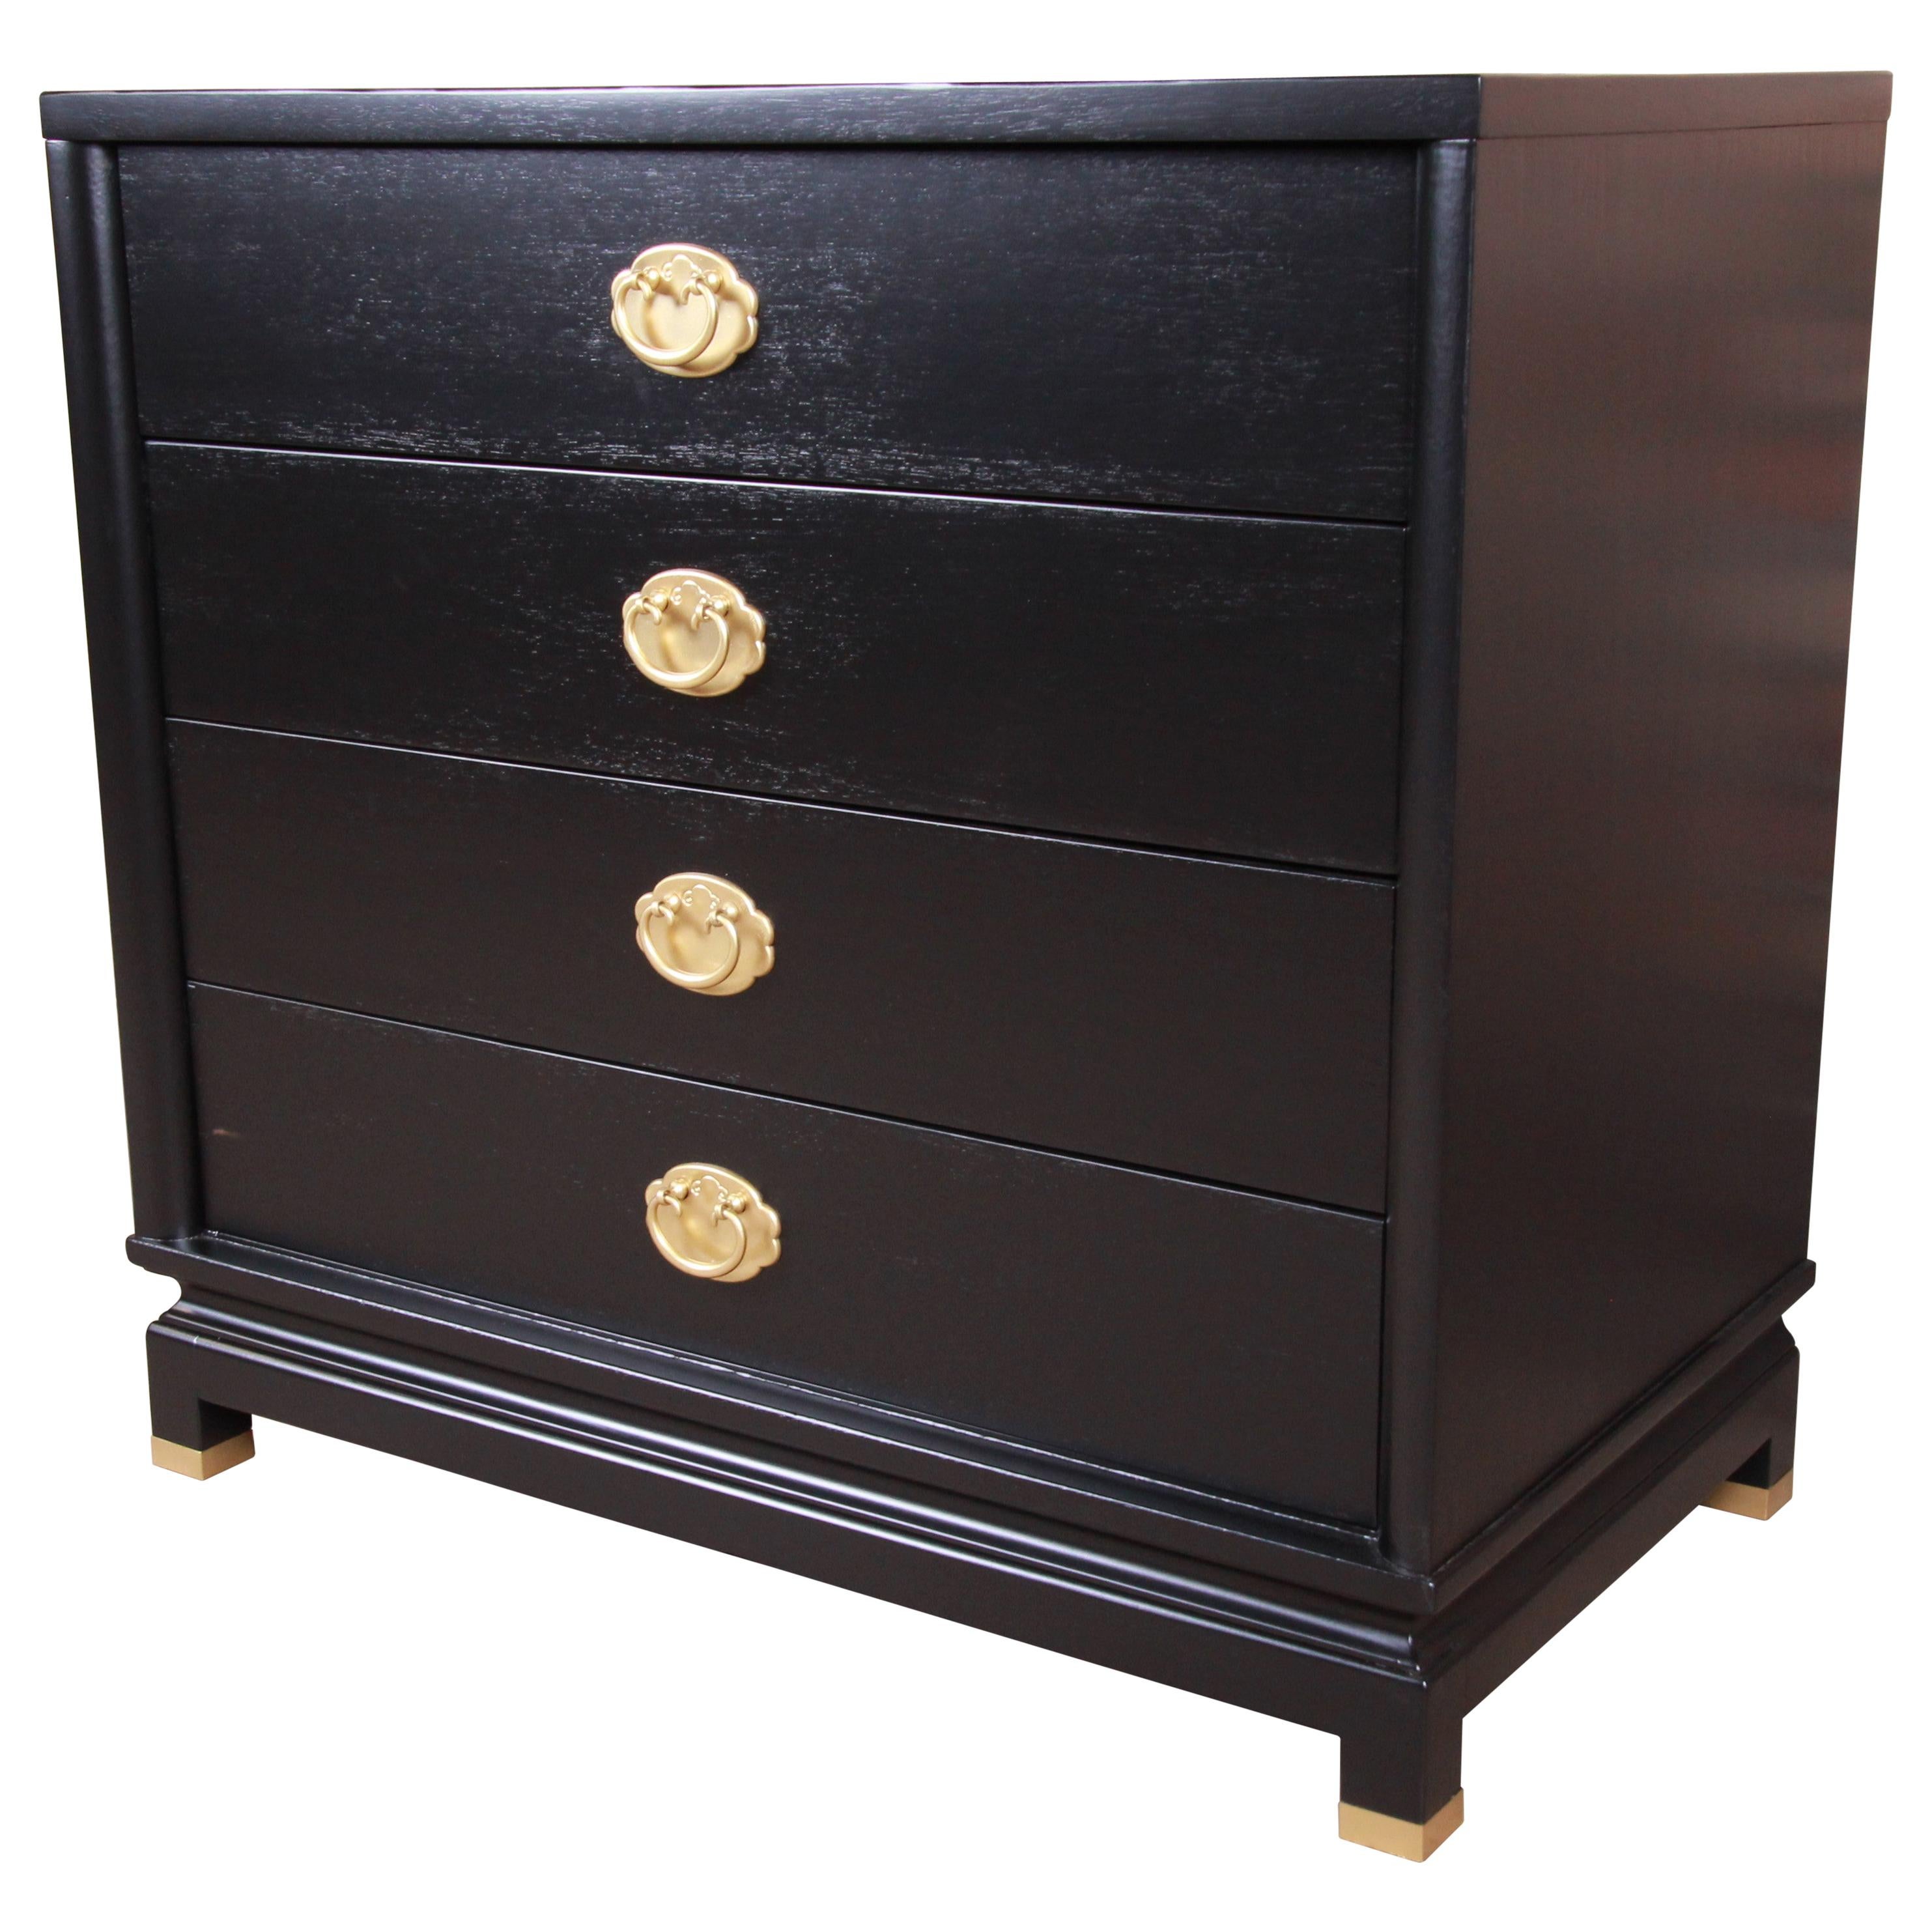 An exceptional midcentury Hollywood Regency chinoiserie four-drawer dresser chest

By Merton Gershun for American of Martinsville

USA, circa 1960s

Black lacquered walnut and Asian-inspired brass hardware and brass-capped feet.

Measures: